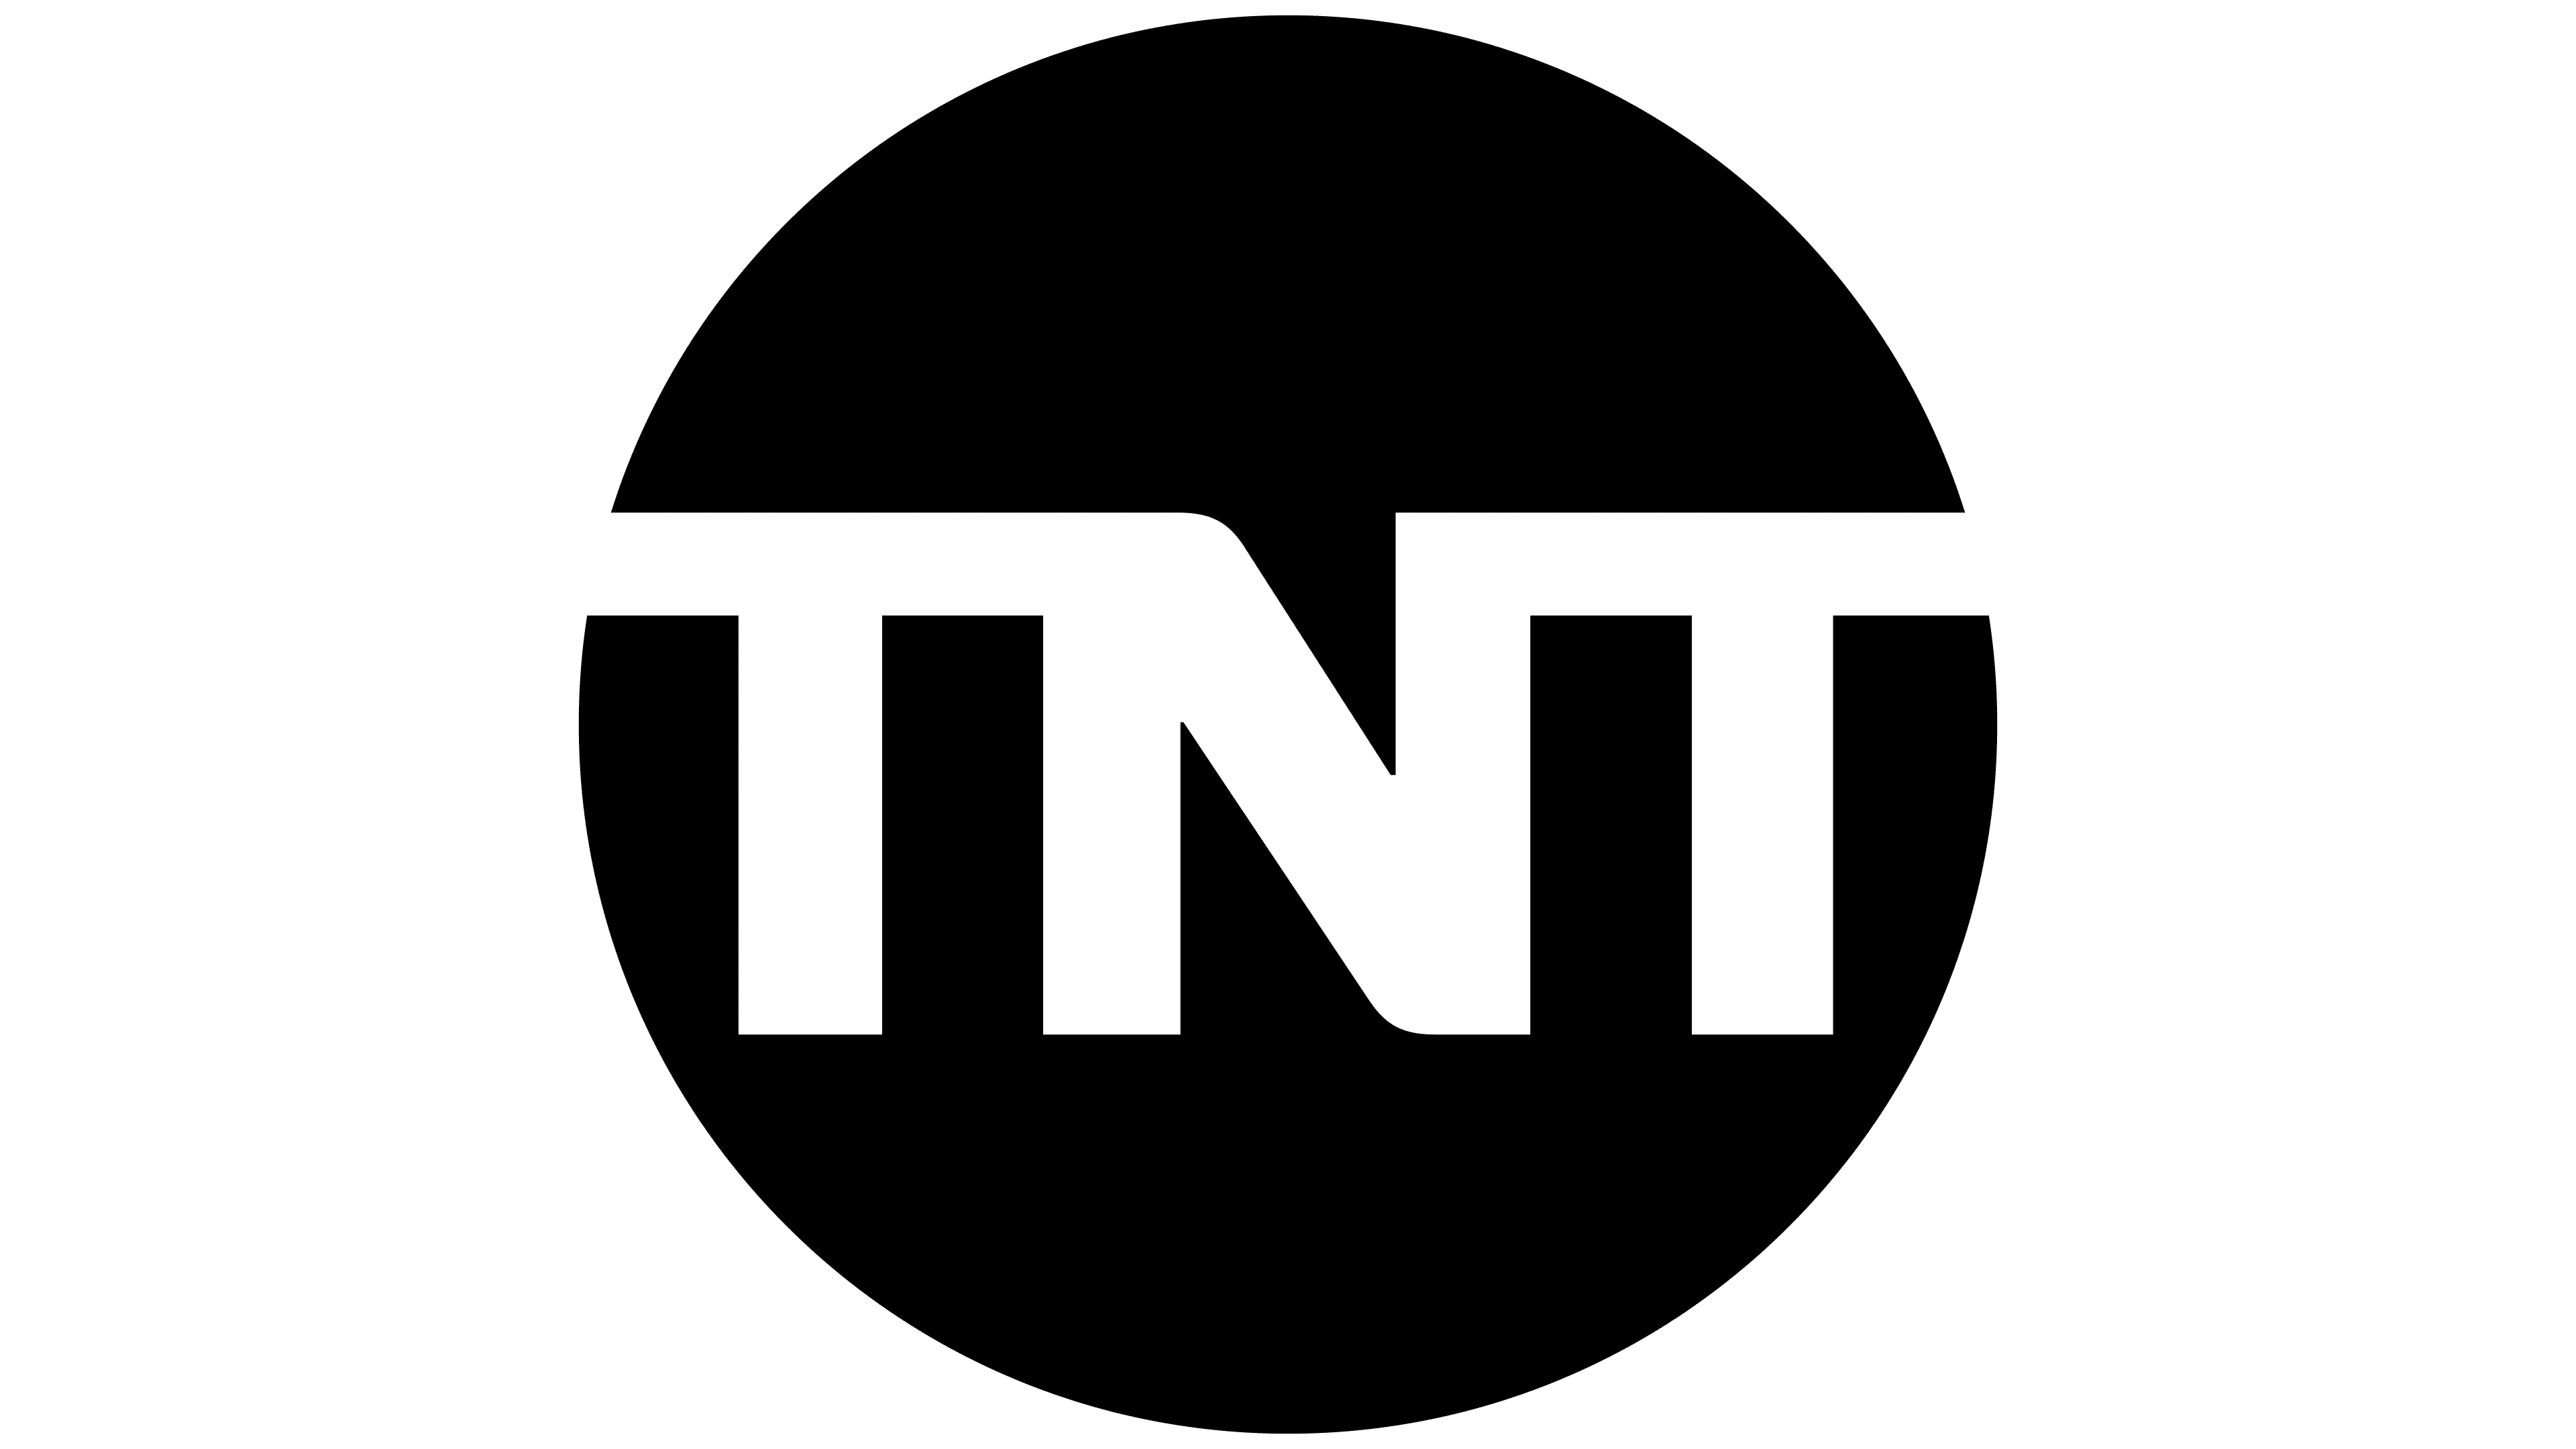 TNT Logo, symbol, meaning, history, PNG, brand